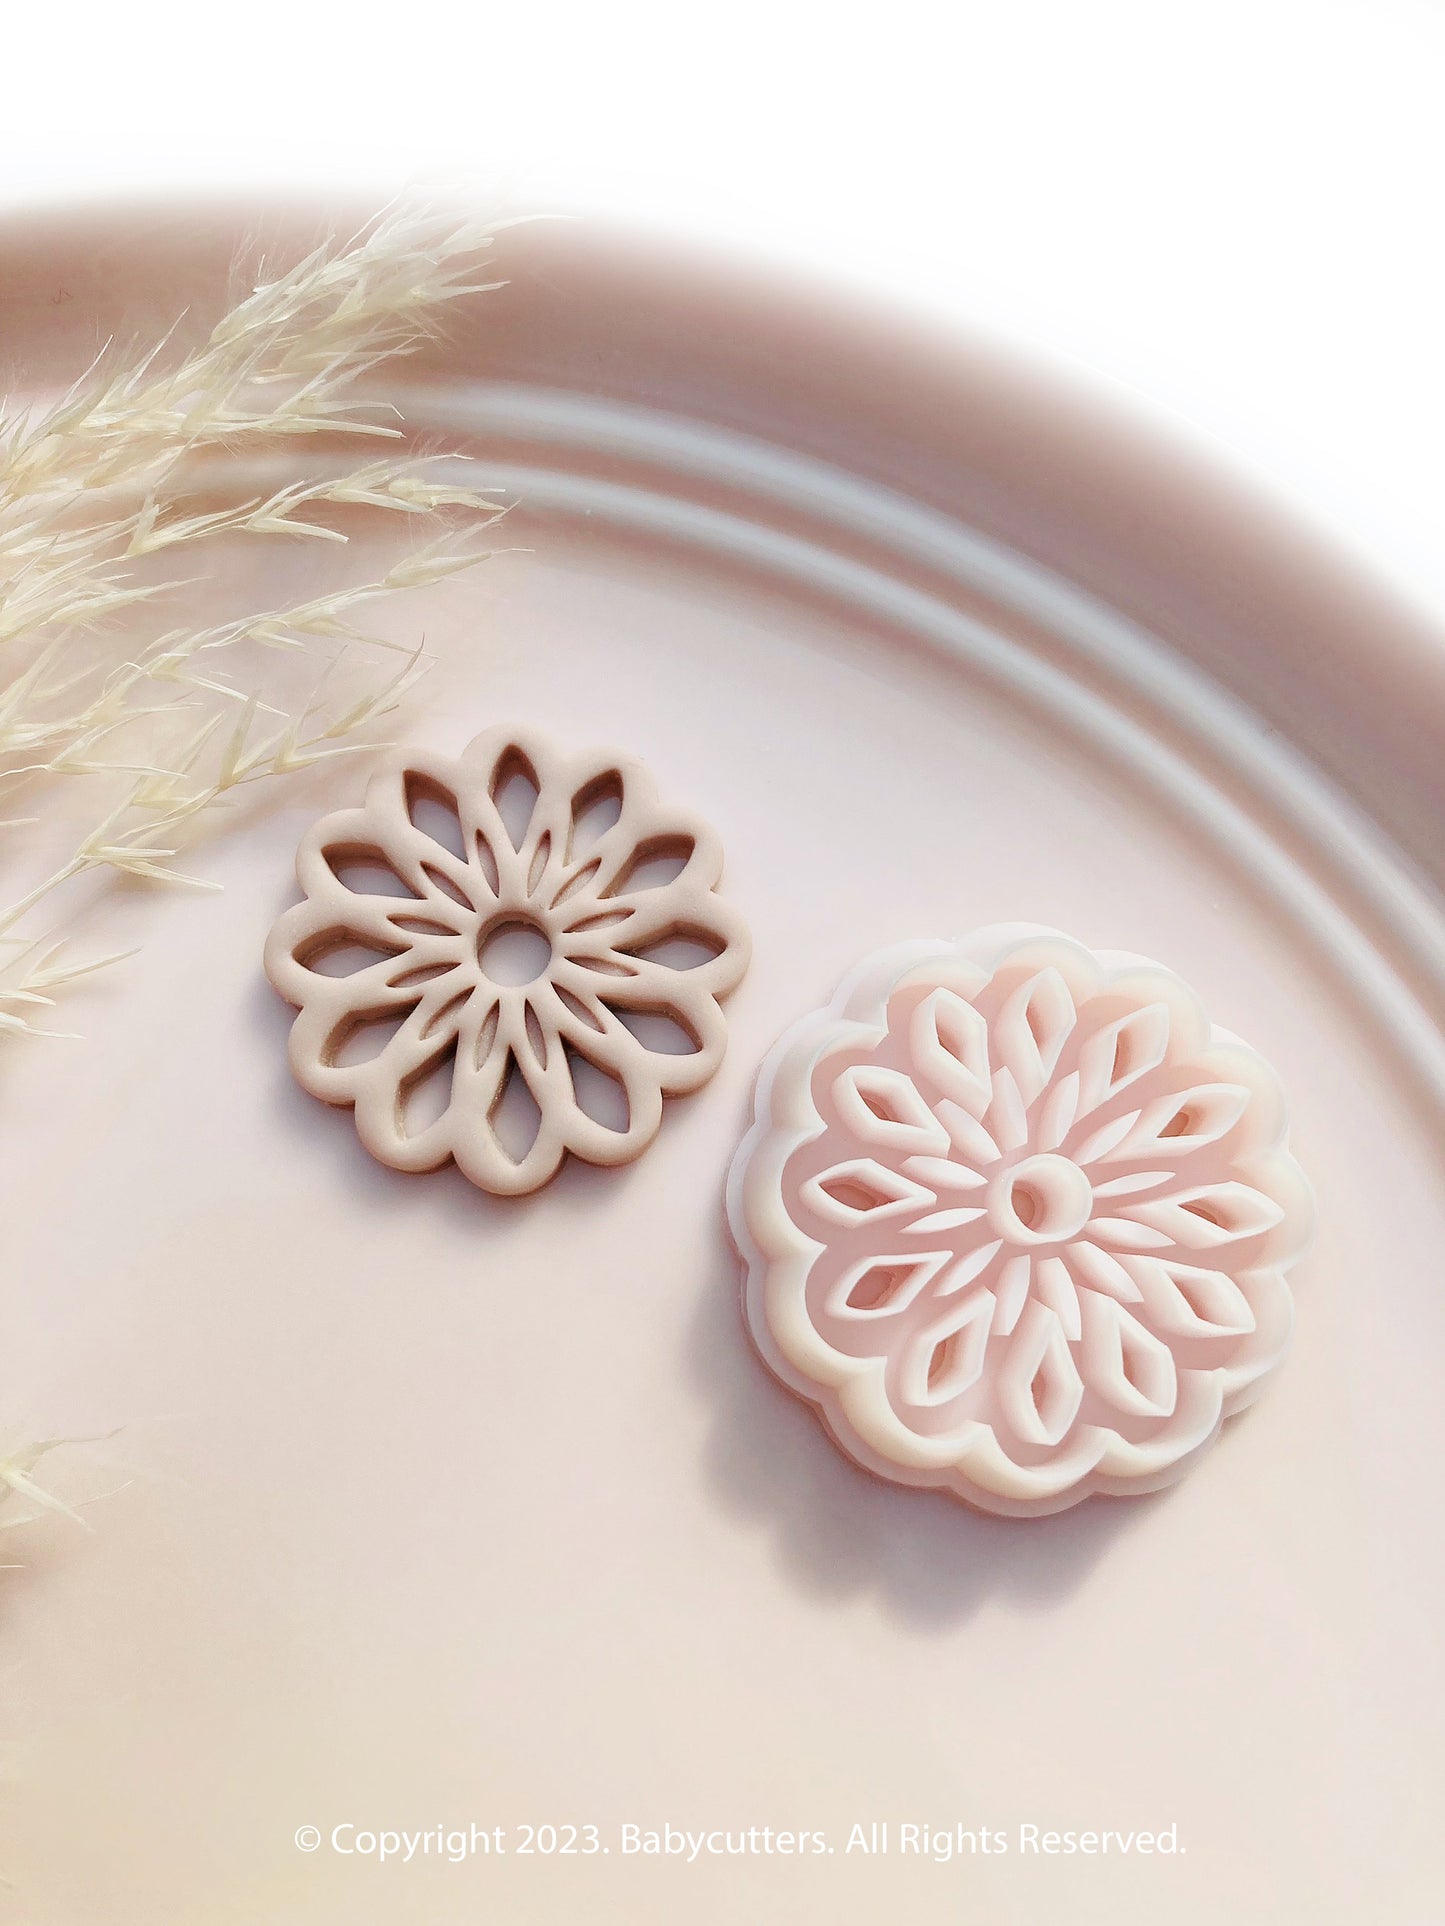 Using polymer clay with a Mooncake press with many different uses.